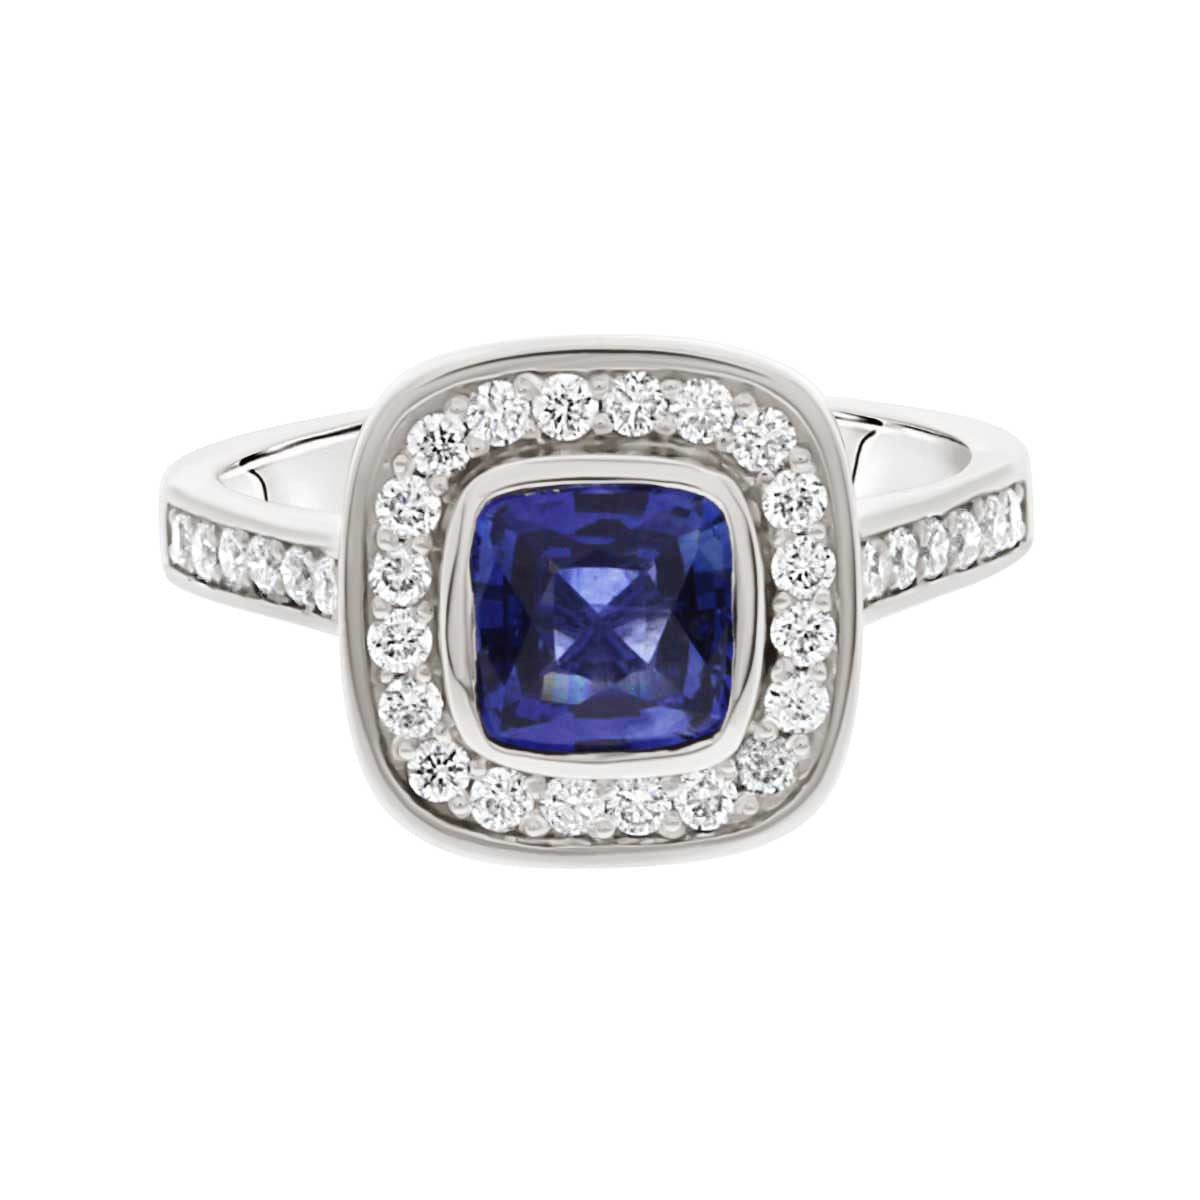 Sapphire Diamond Engagement Ring in white gold